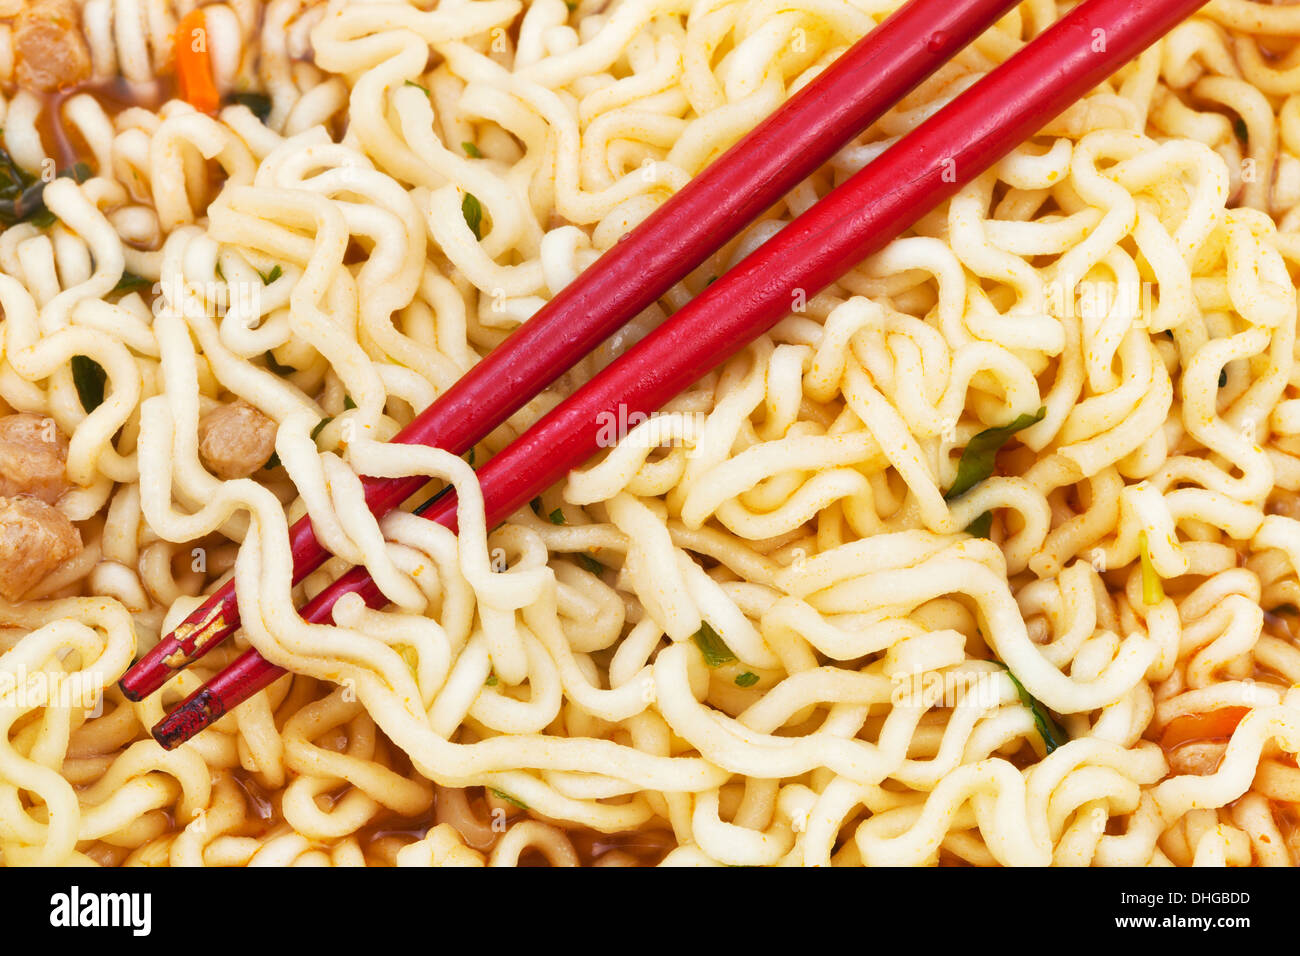 red chopsticks on cooked instant ramen close up Stock Photo